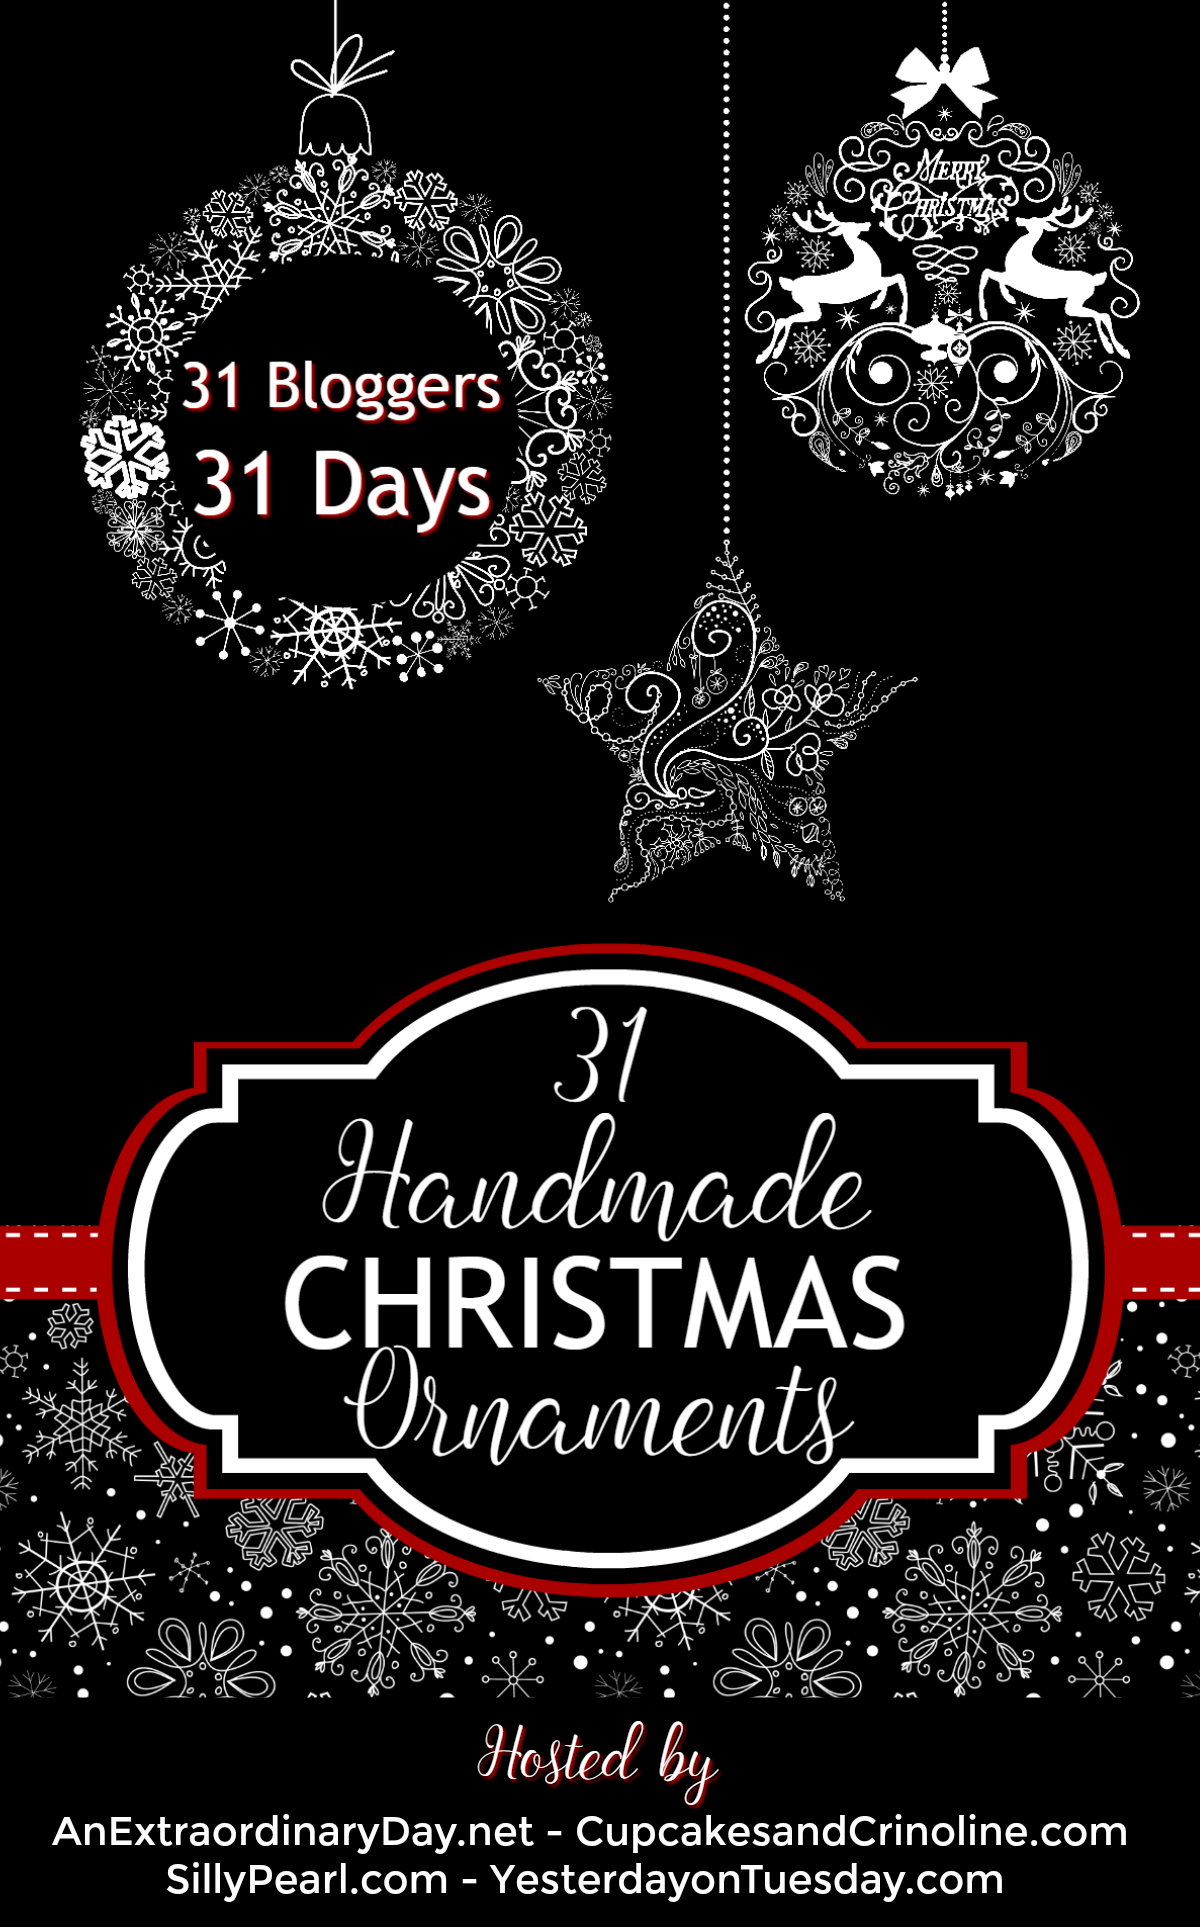 31-handmade-christmas-ornaments-brought-to-you-by-31-bloggers-over-31-days-anextraordinaryday-net